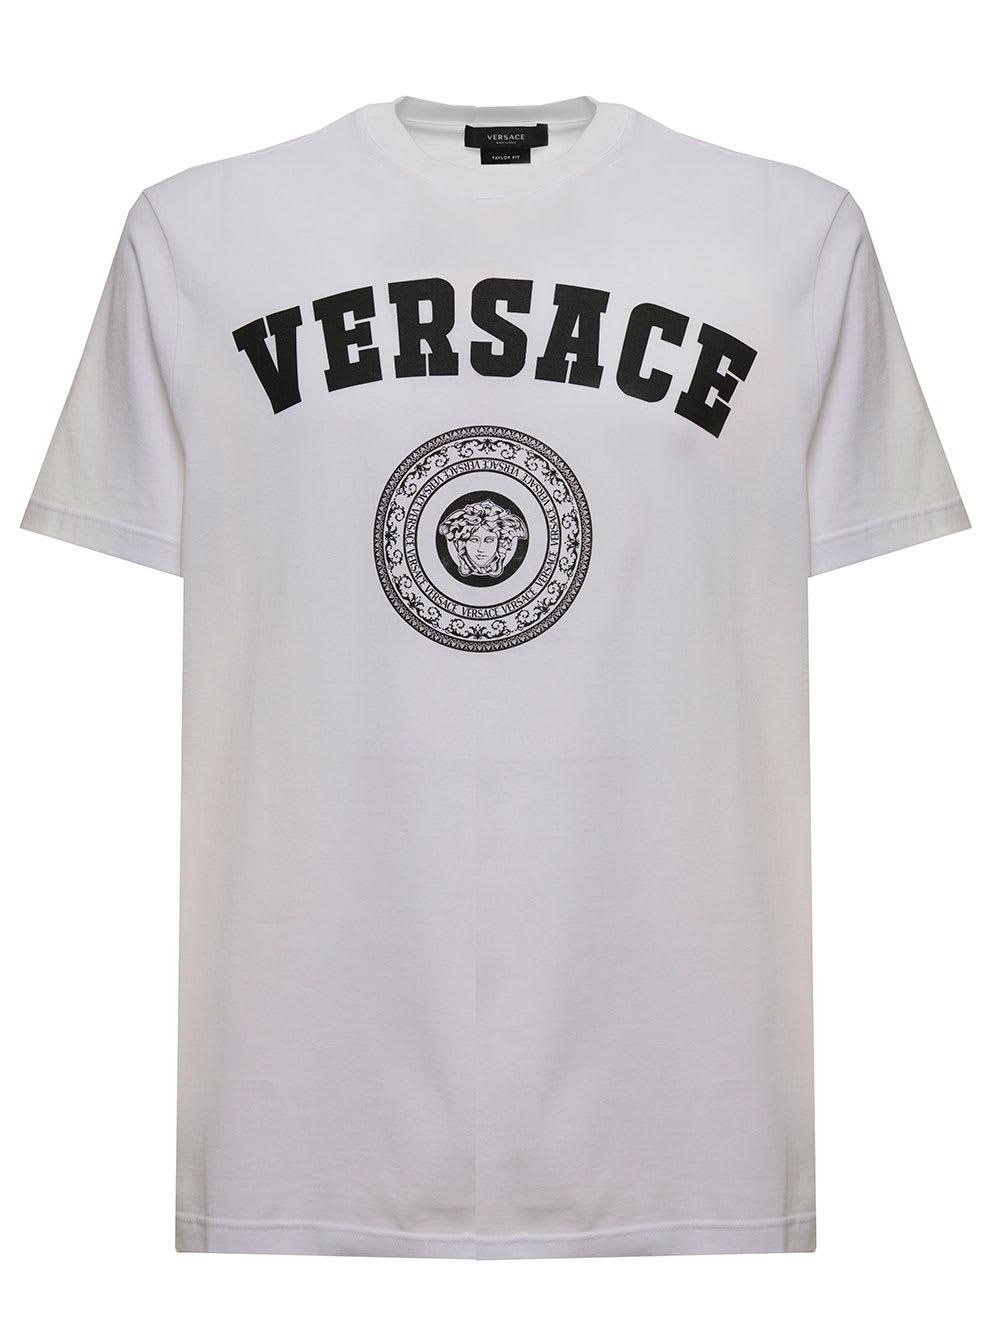 Versace S Cotton T-shirt With Logo Print in White for Men - Lyst